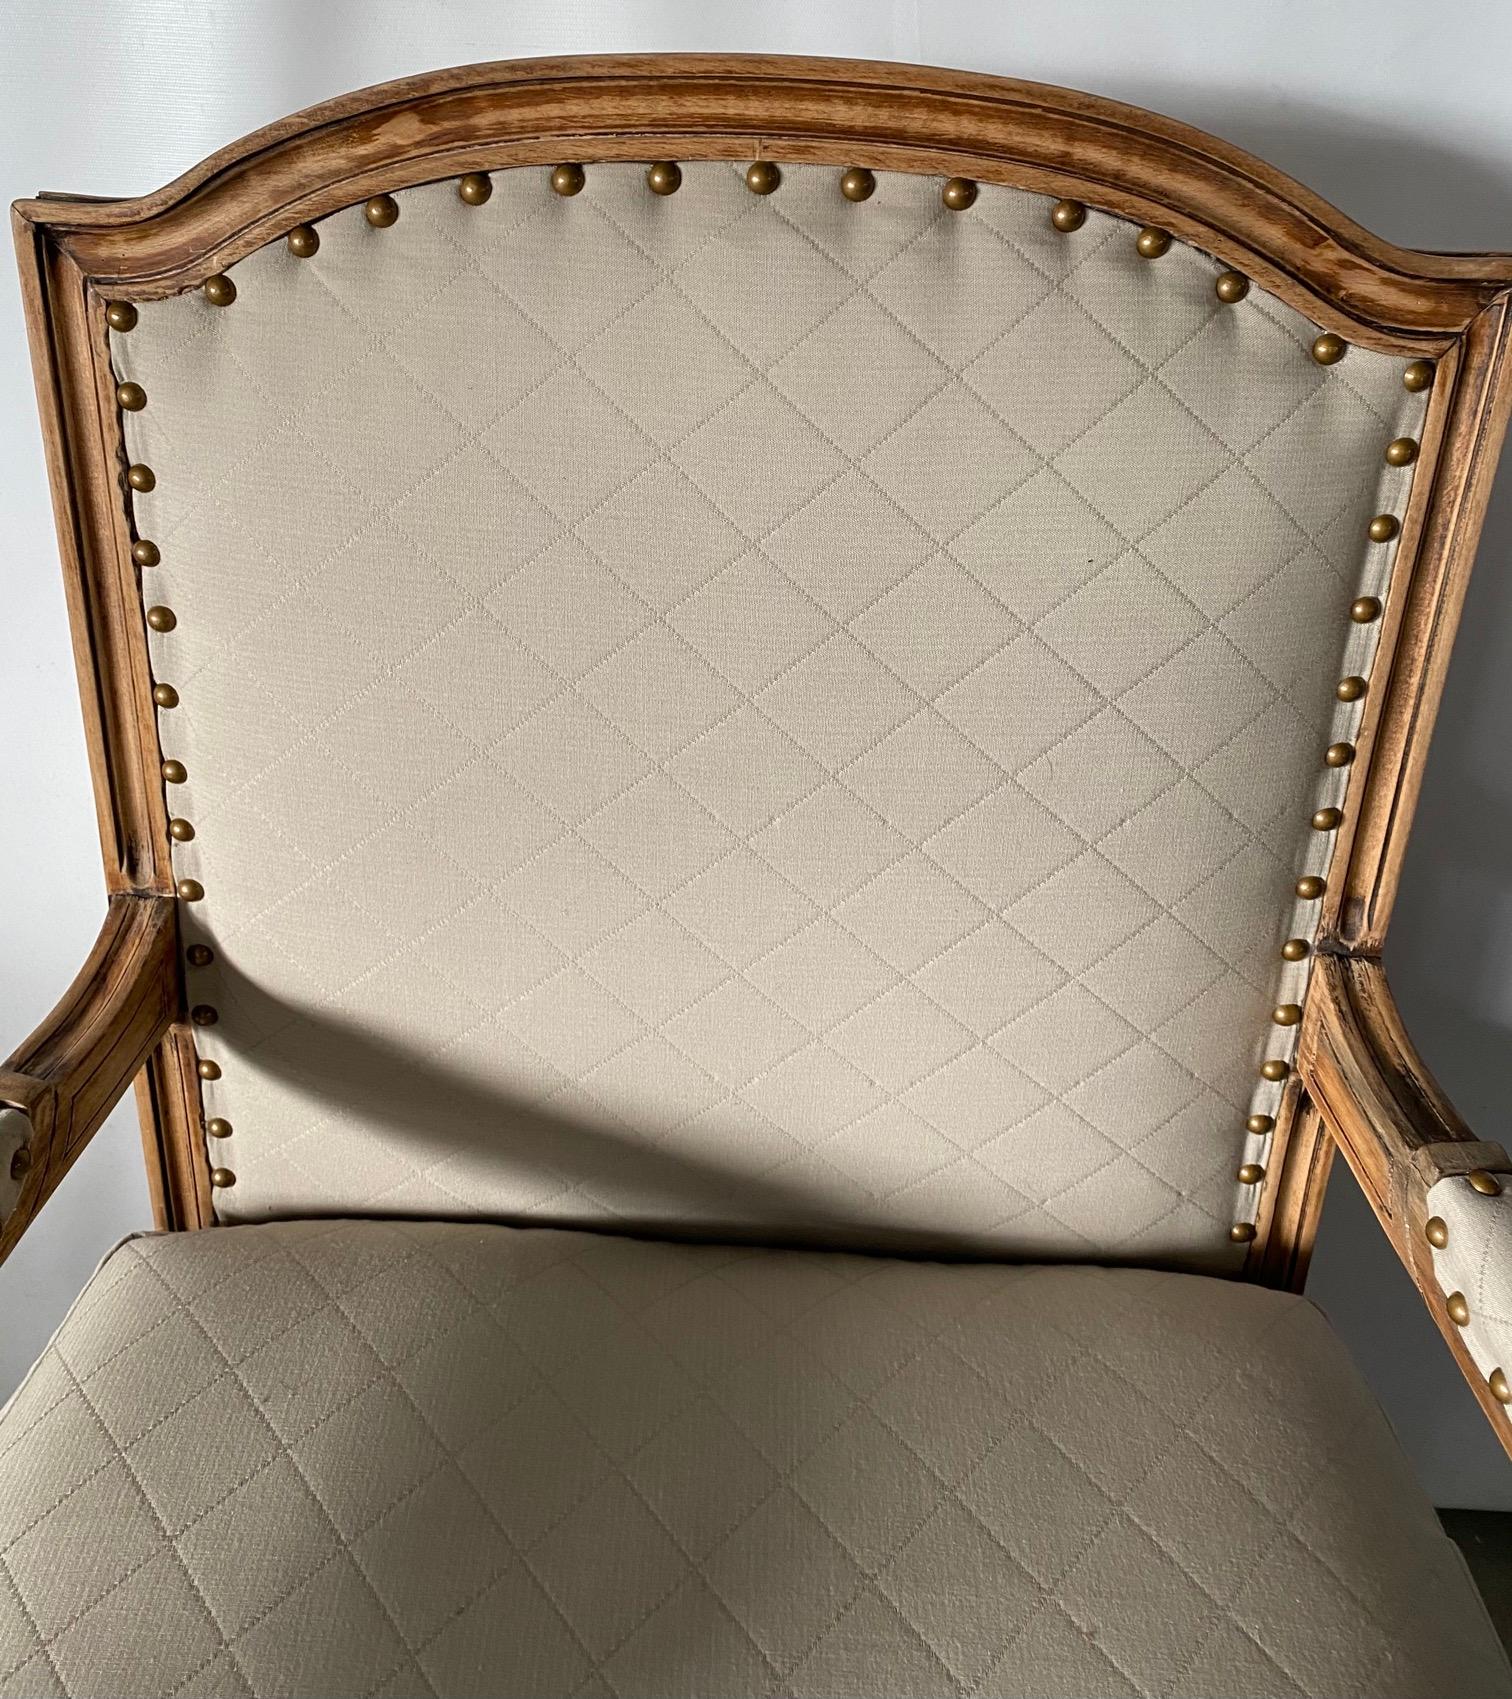 Elegant French Louis XVI style armchair with bleached wood frame, fluted leg and cubic blocks decorated with florets, upholstered in Classic beige suited fabric. Appropriate for dining or desk chairs, vanity chair in modern or traditional French,